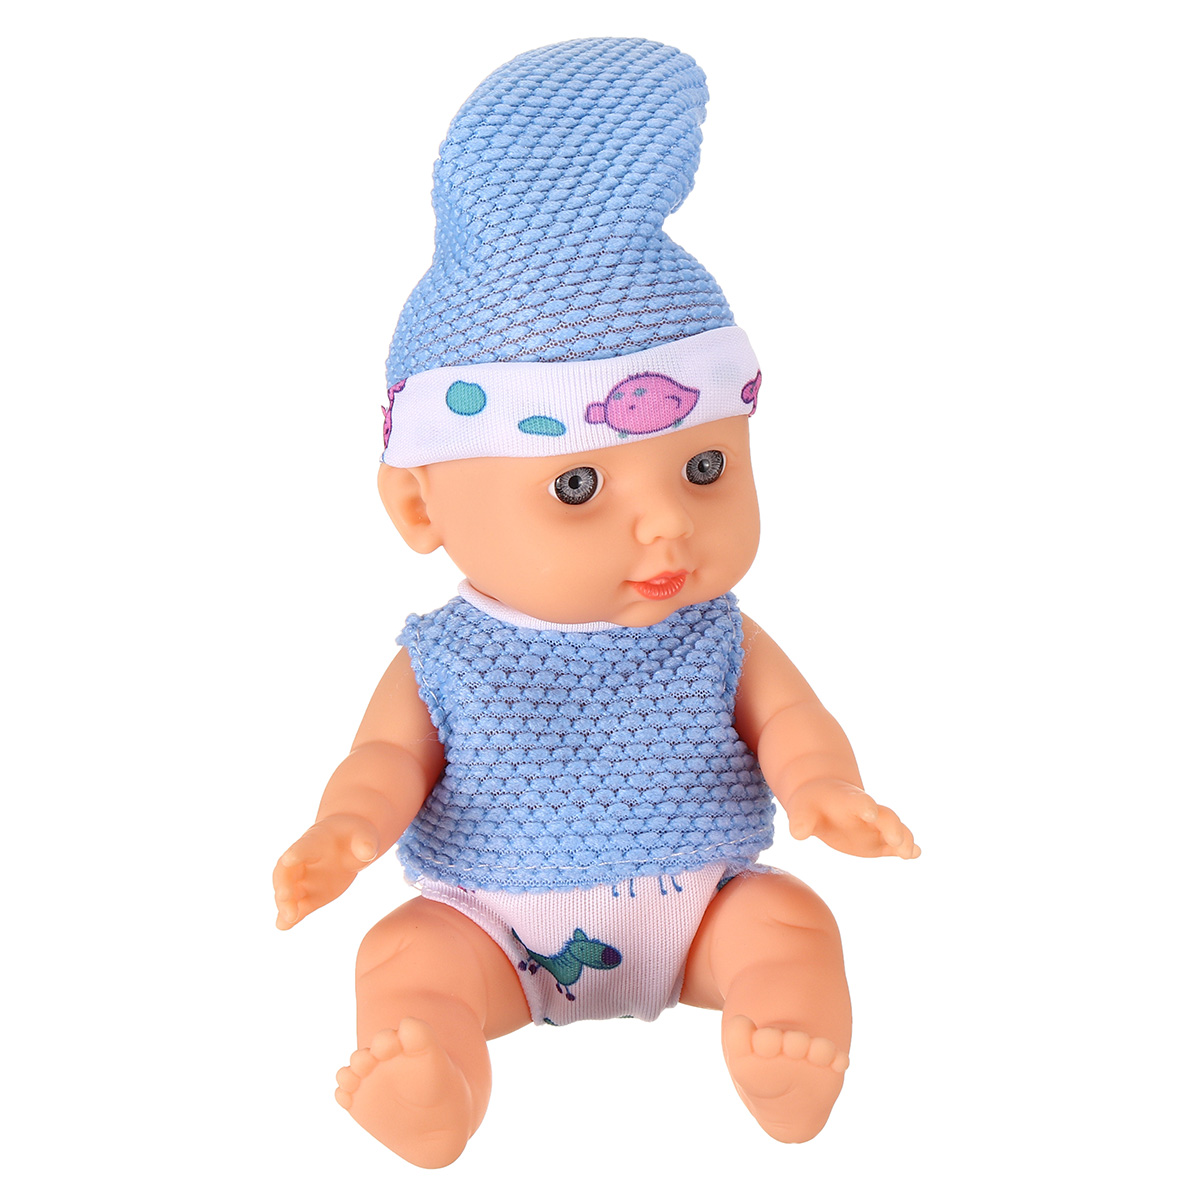 Simulation-Baby-3D-Creative-Cute-Doll-Play-House-Toy-Doll-Vinyl-Doll-Gift-1818656-9